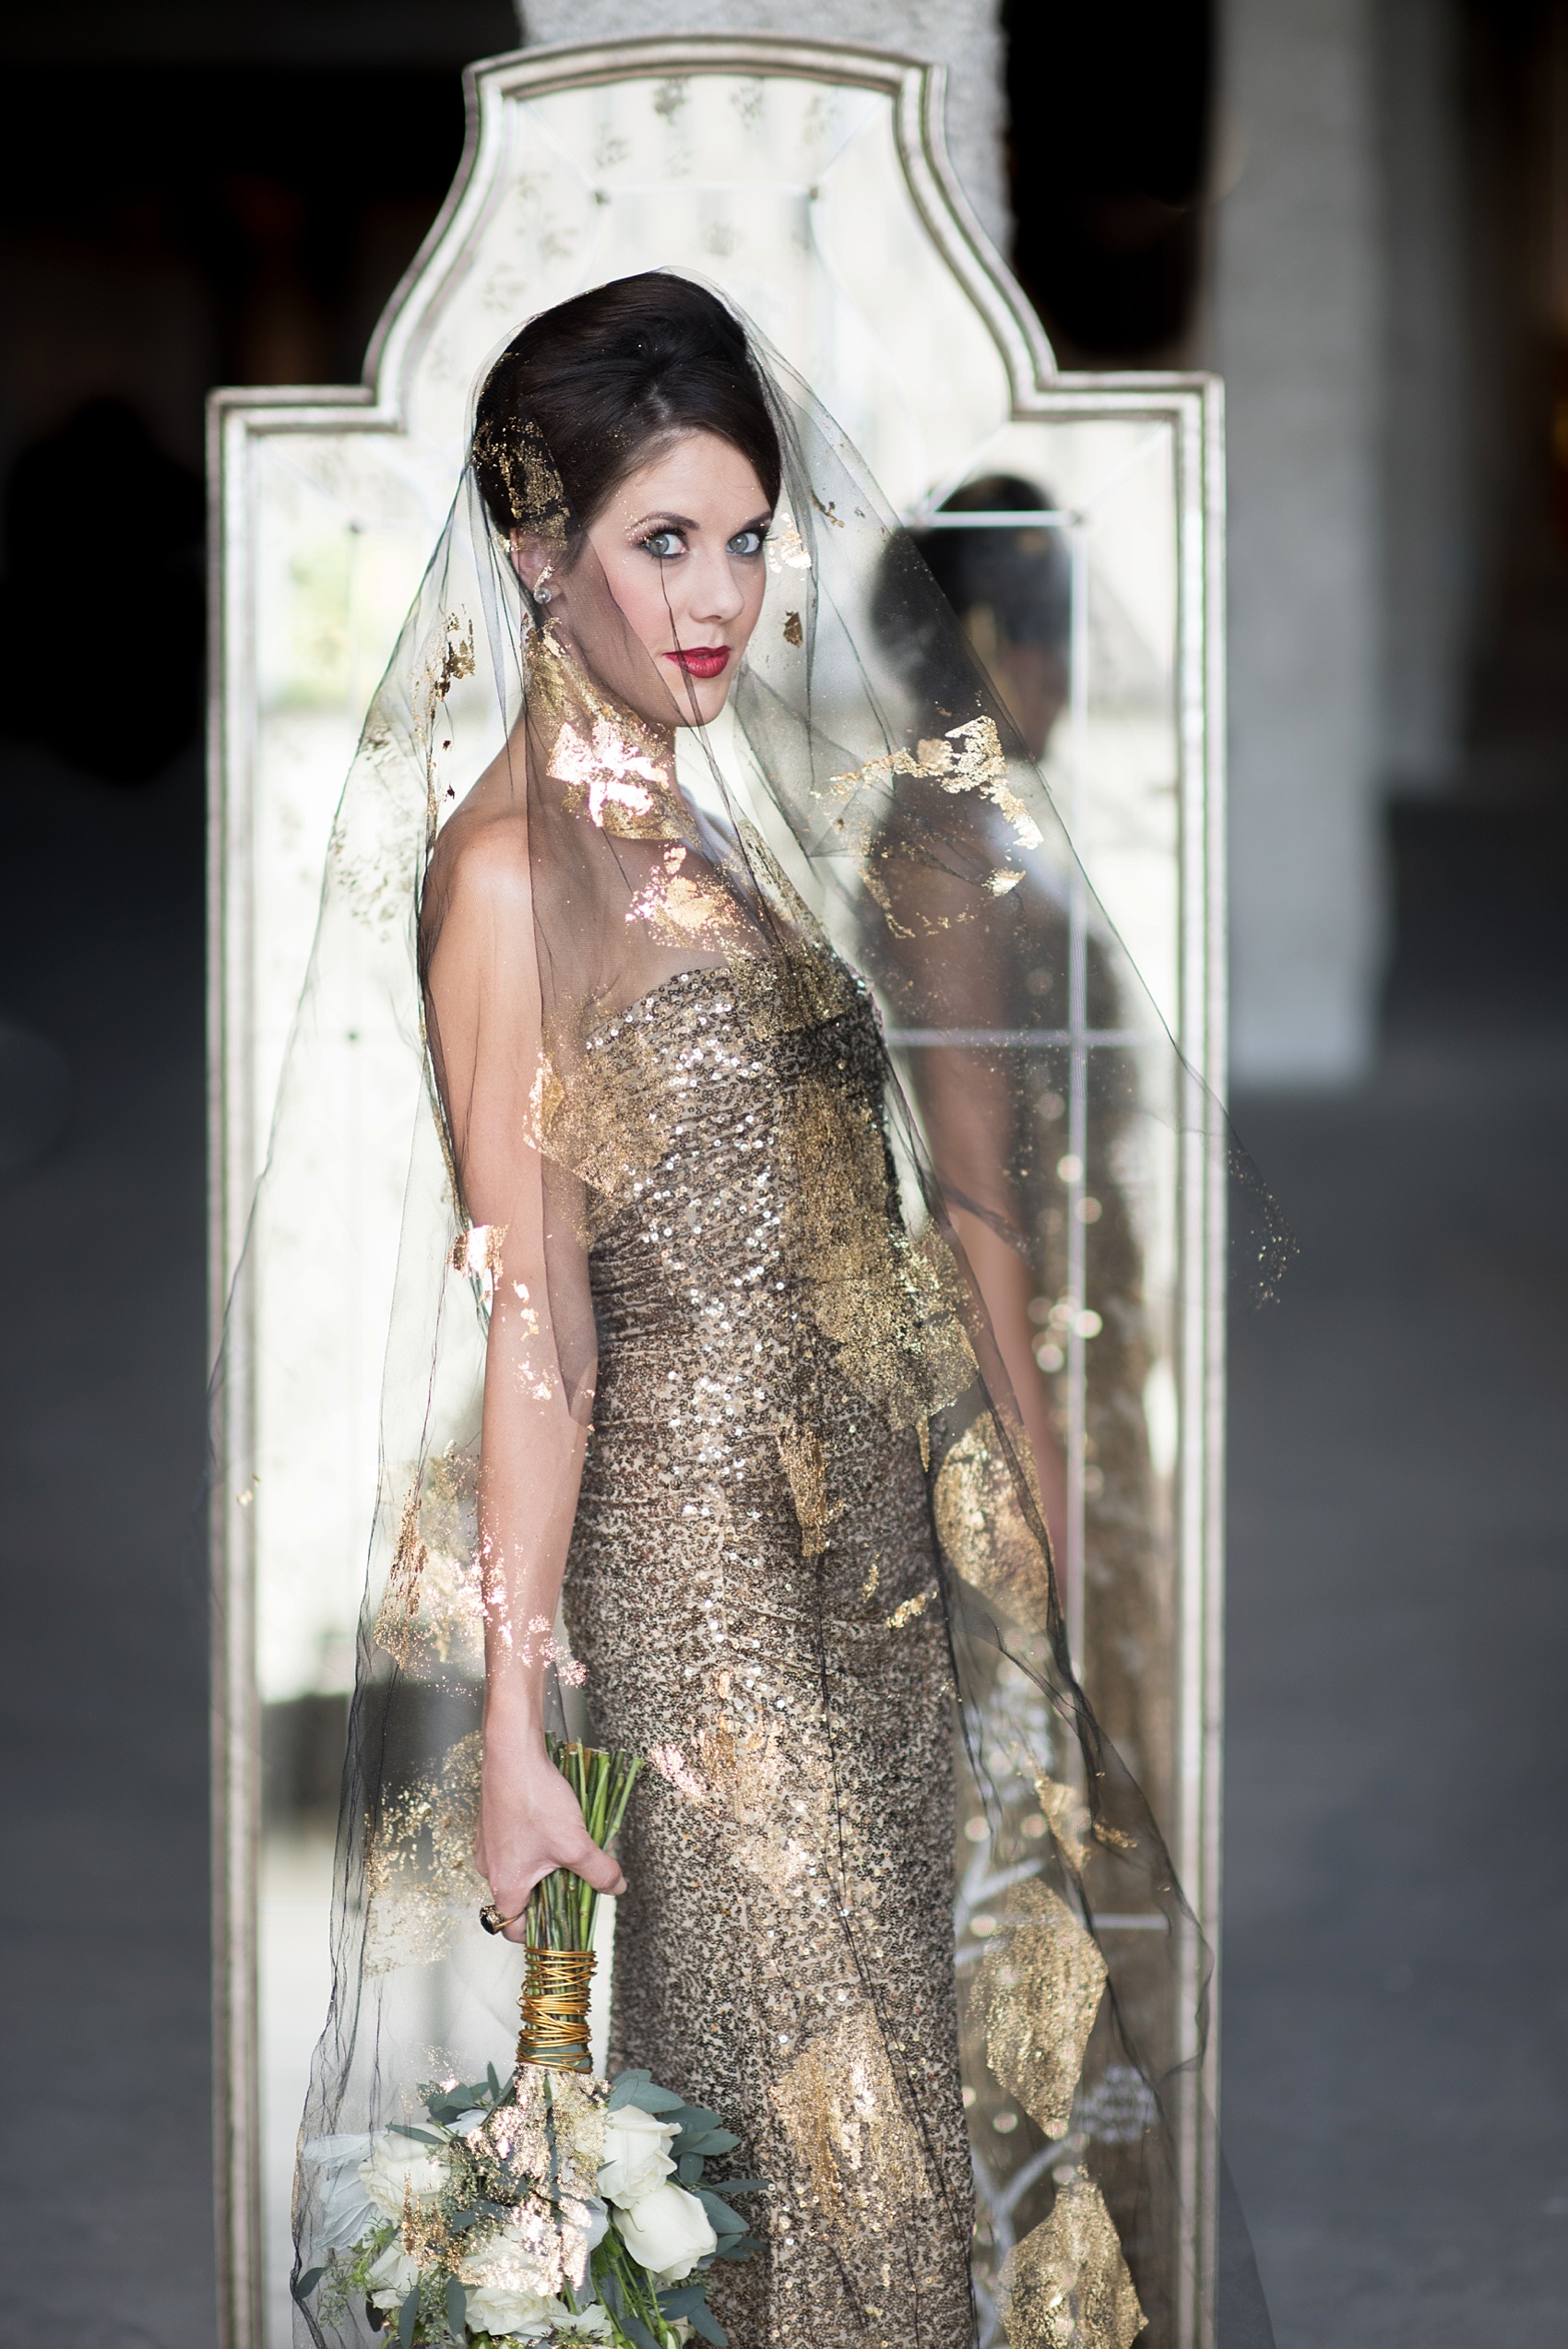 Destination wedding photographer Mikkel Paige captures a glamorous industrial bridal session in Hawaii with Burnett's Boards and Moana Events. Gold sequin gown from Rent the Runway with the bride in a black veil and gold and white bouquet.